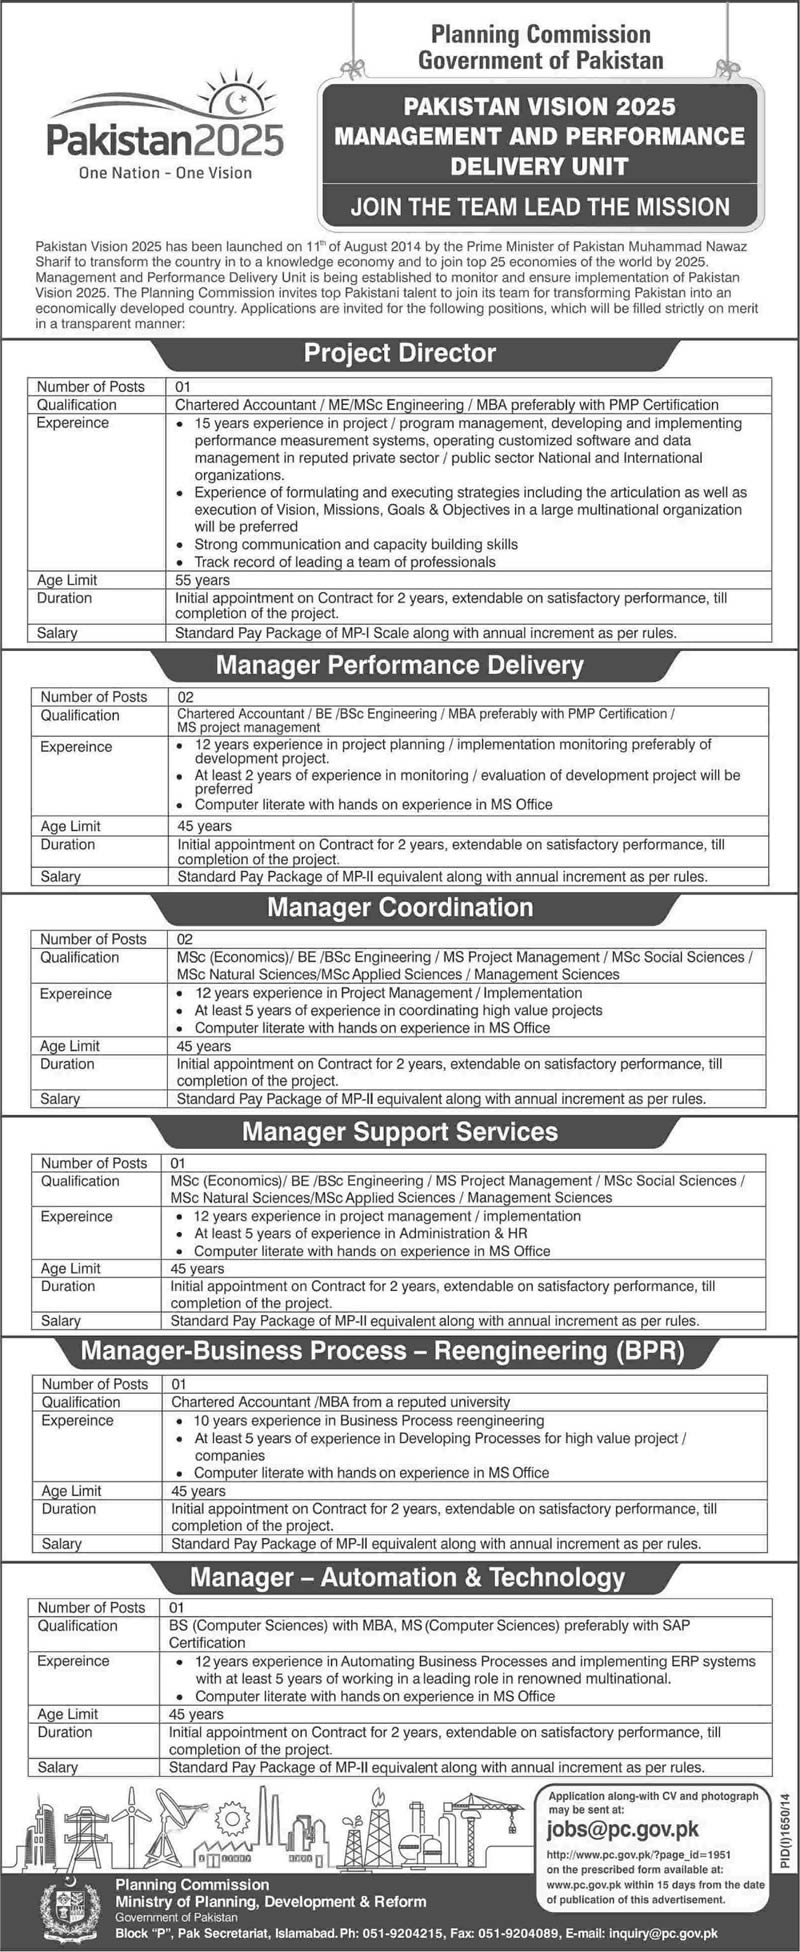 Planning Commission of Pakistan Jobs 2014 October Application Form Download